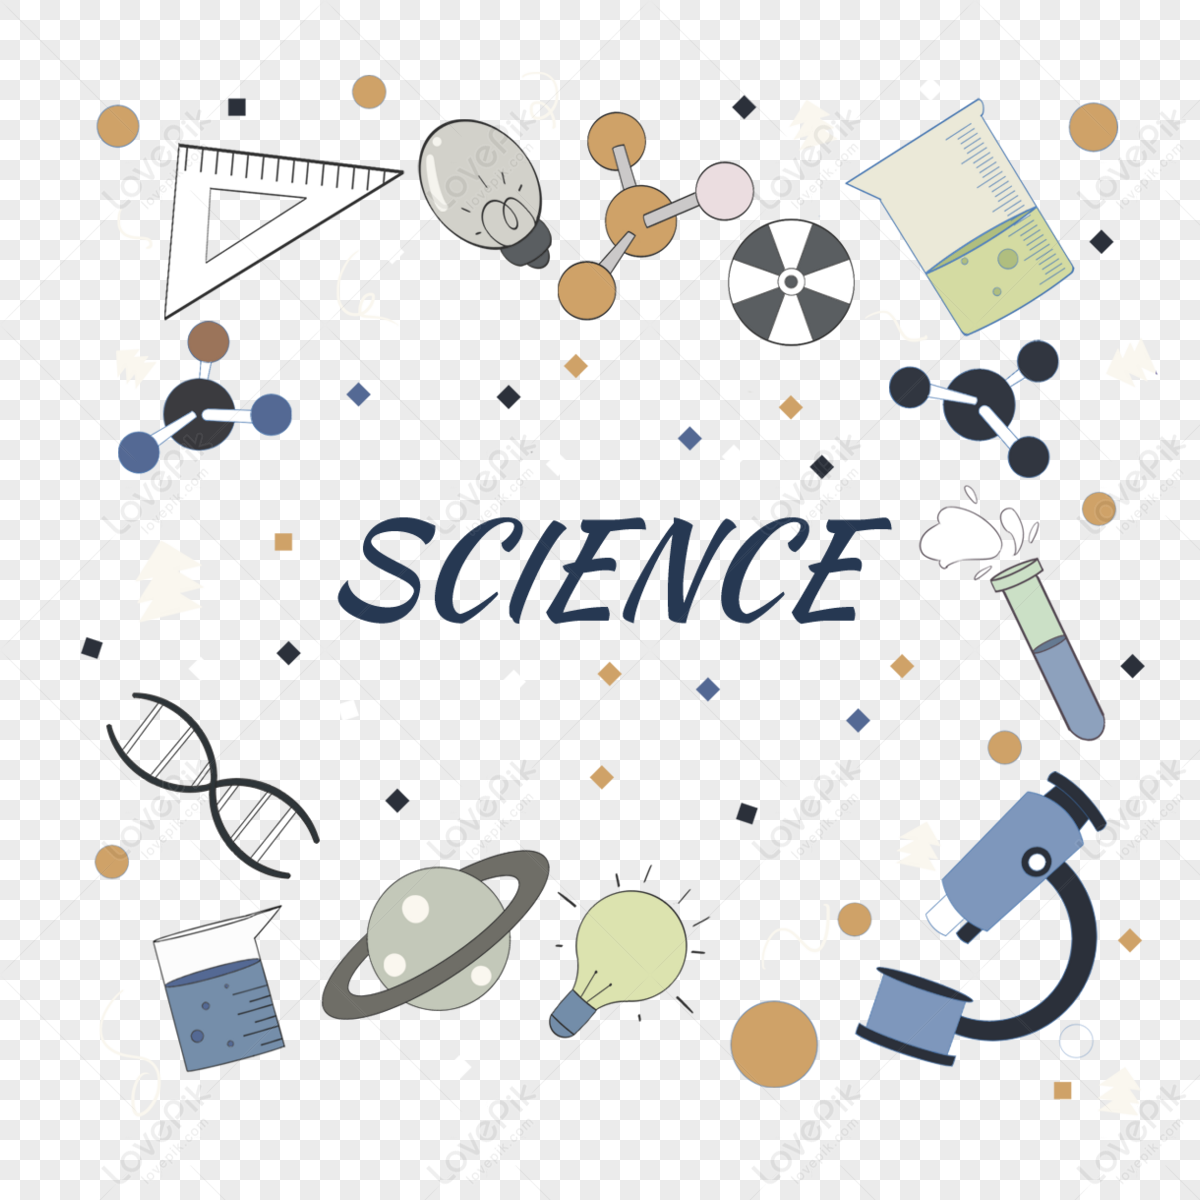 Experiment Science PNG Images With Transparent Background | Free ...